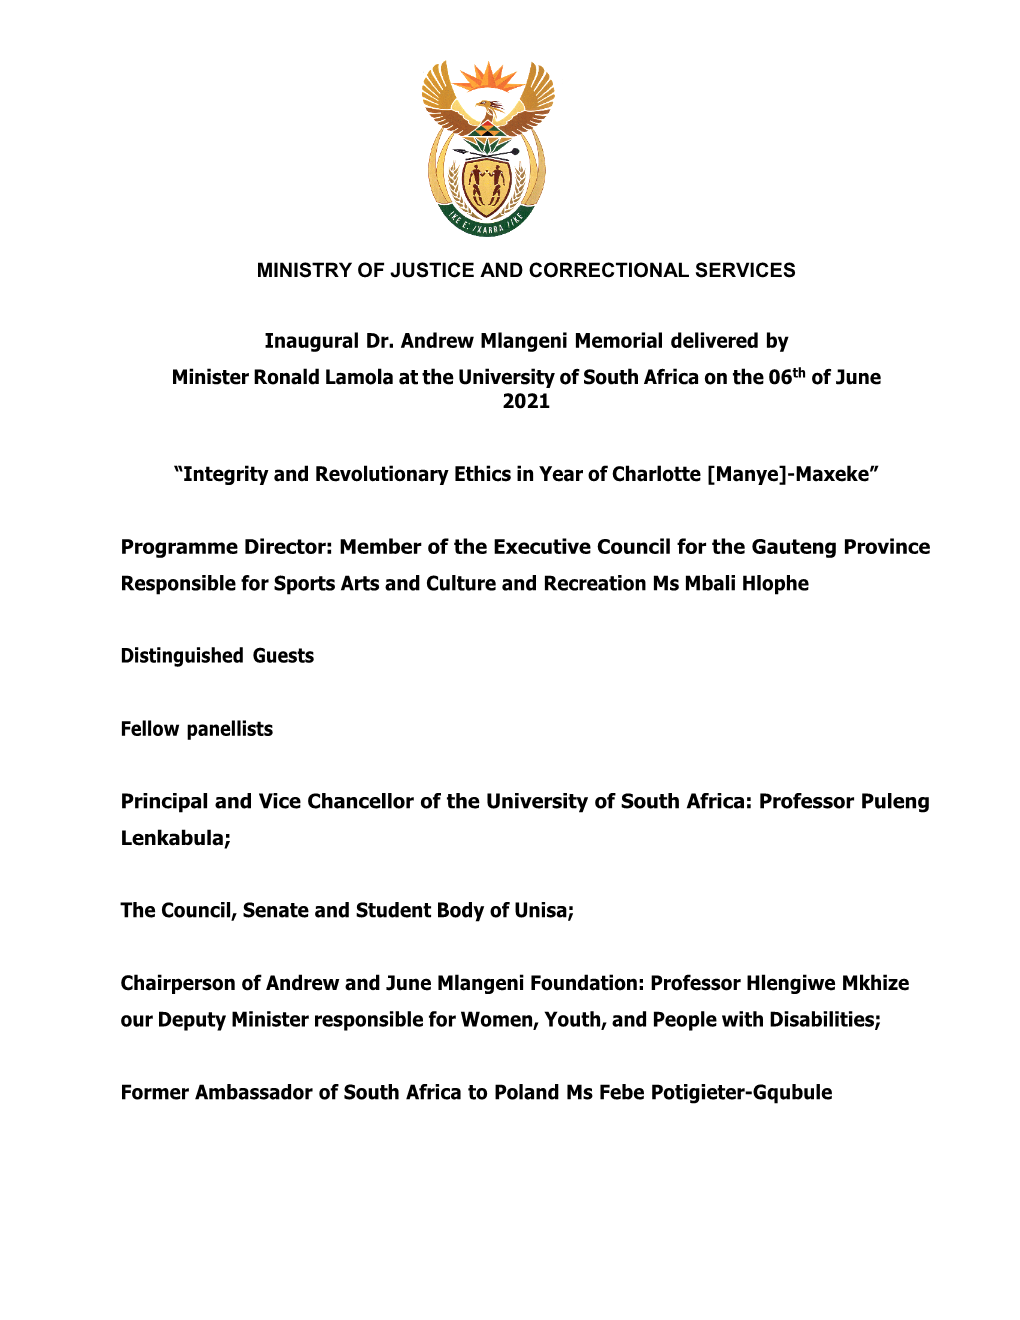 Inaugural Dr. Andrew Mlangeni Memorial Delivered by Minister Ronald Lamola at the University of South Africa on the 06Th of June 2021